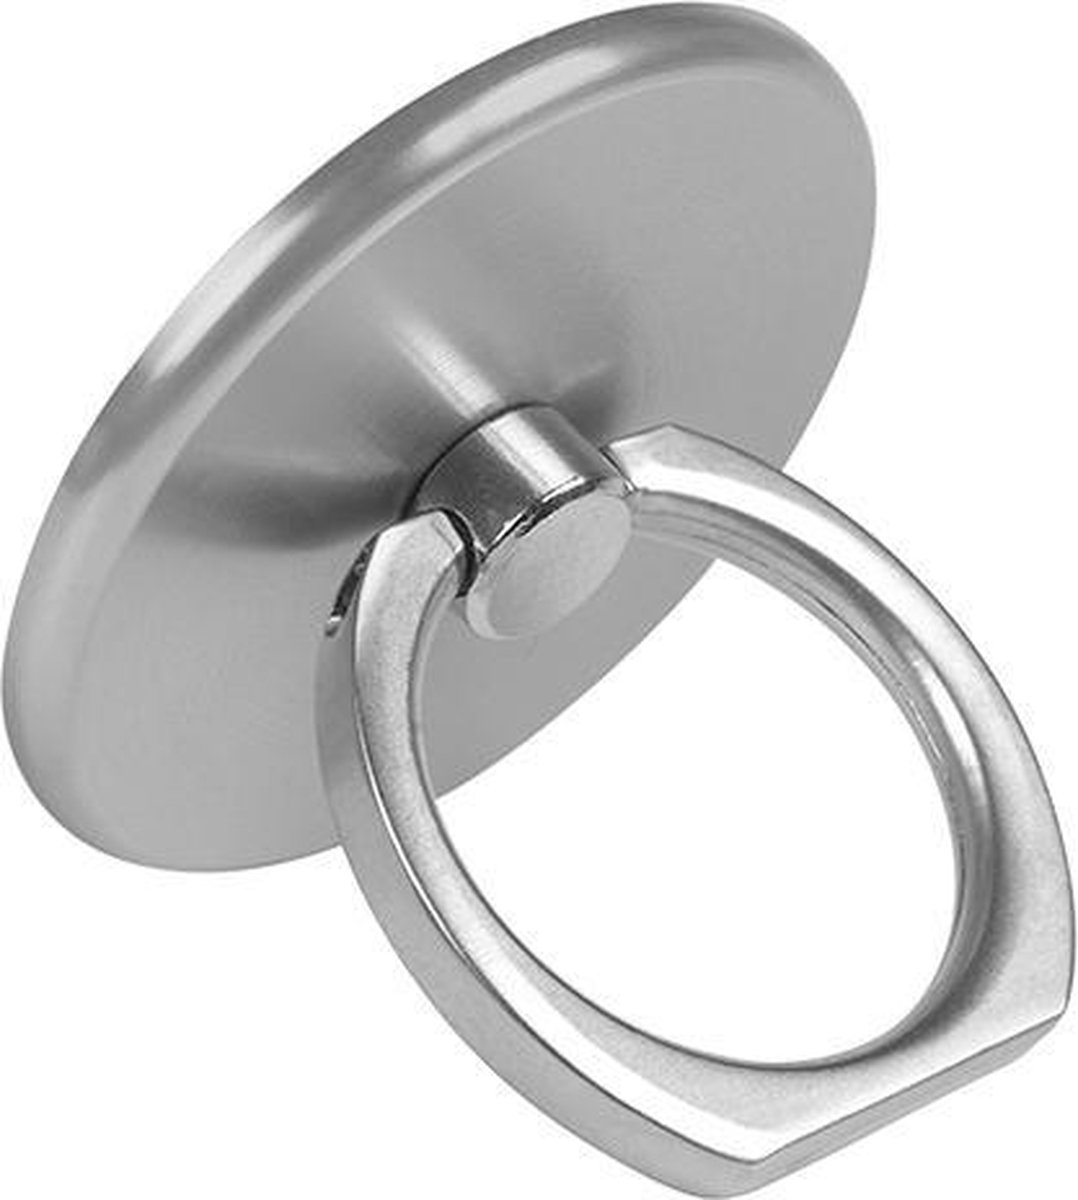 Magcover - Ring Holder for iPhone Case Series - Silver - Metal - Patented